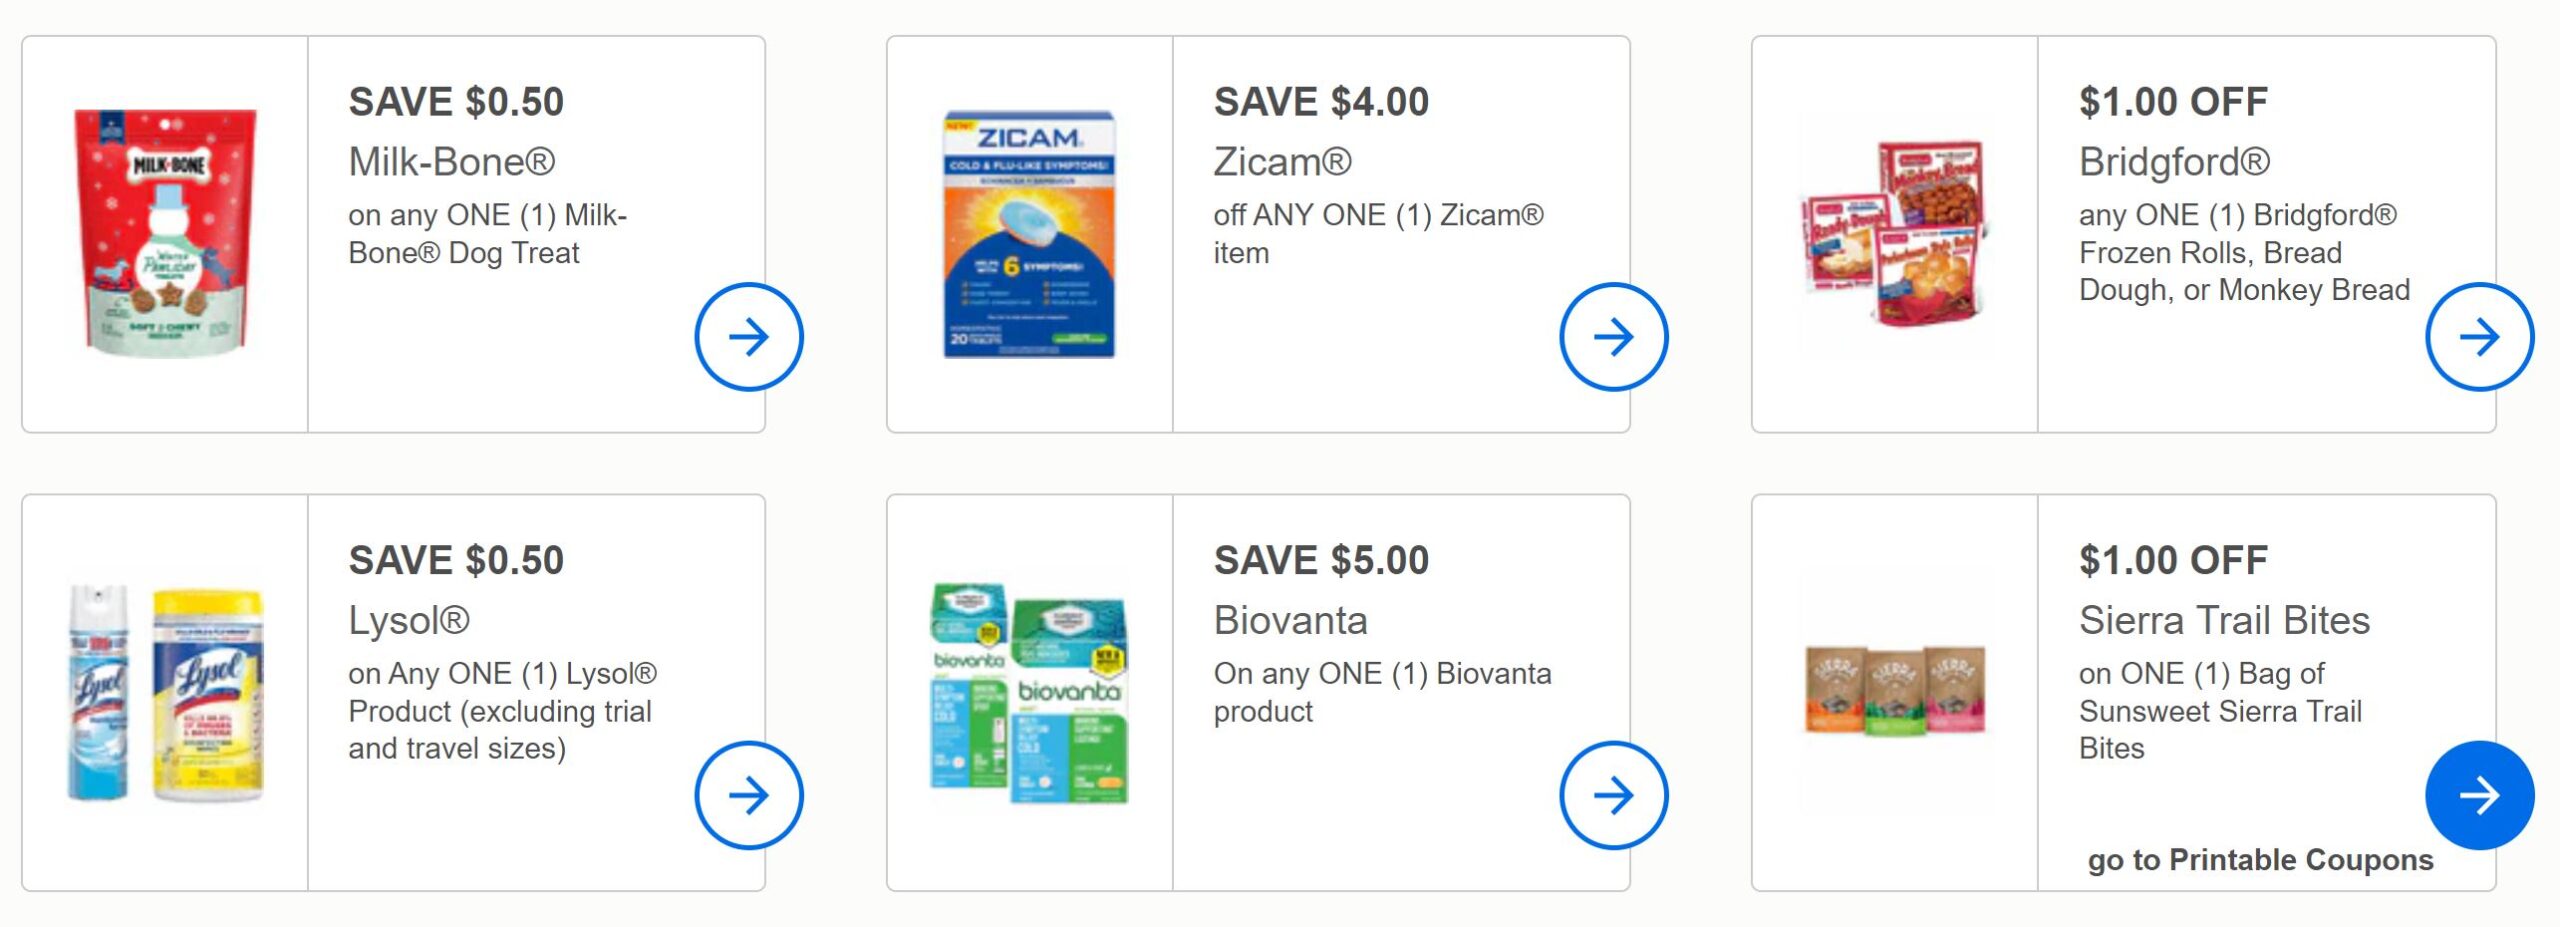 0 in New Printable Coupons